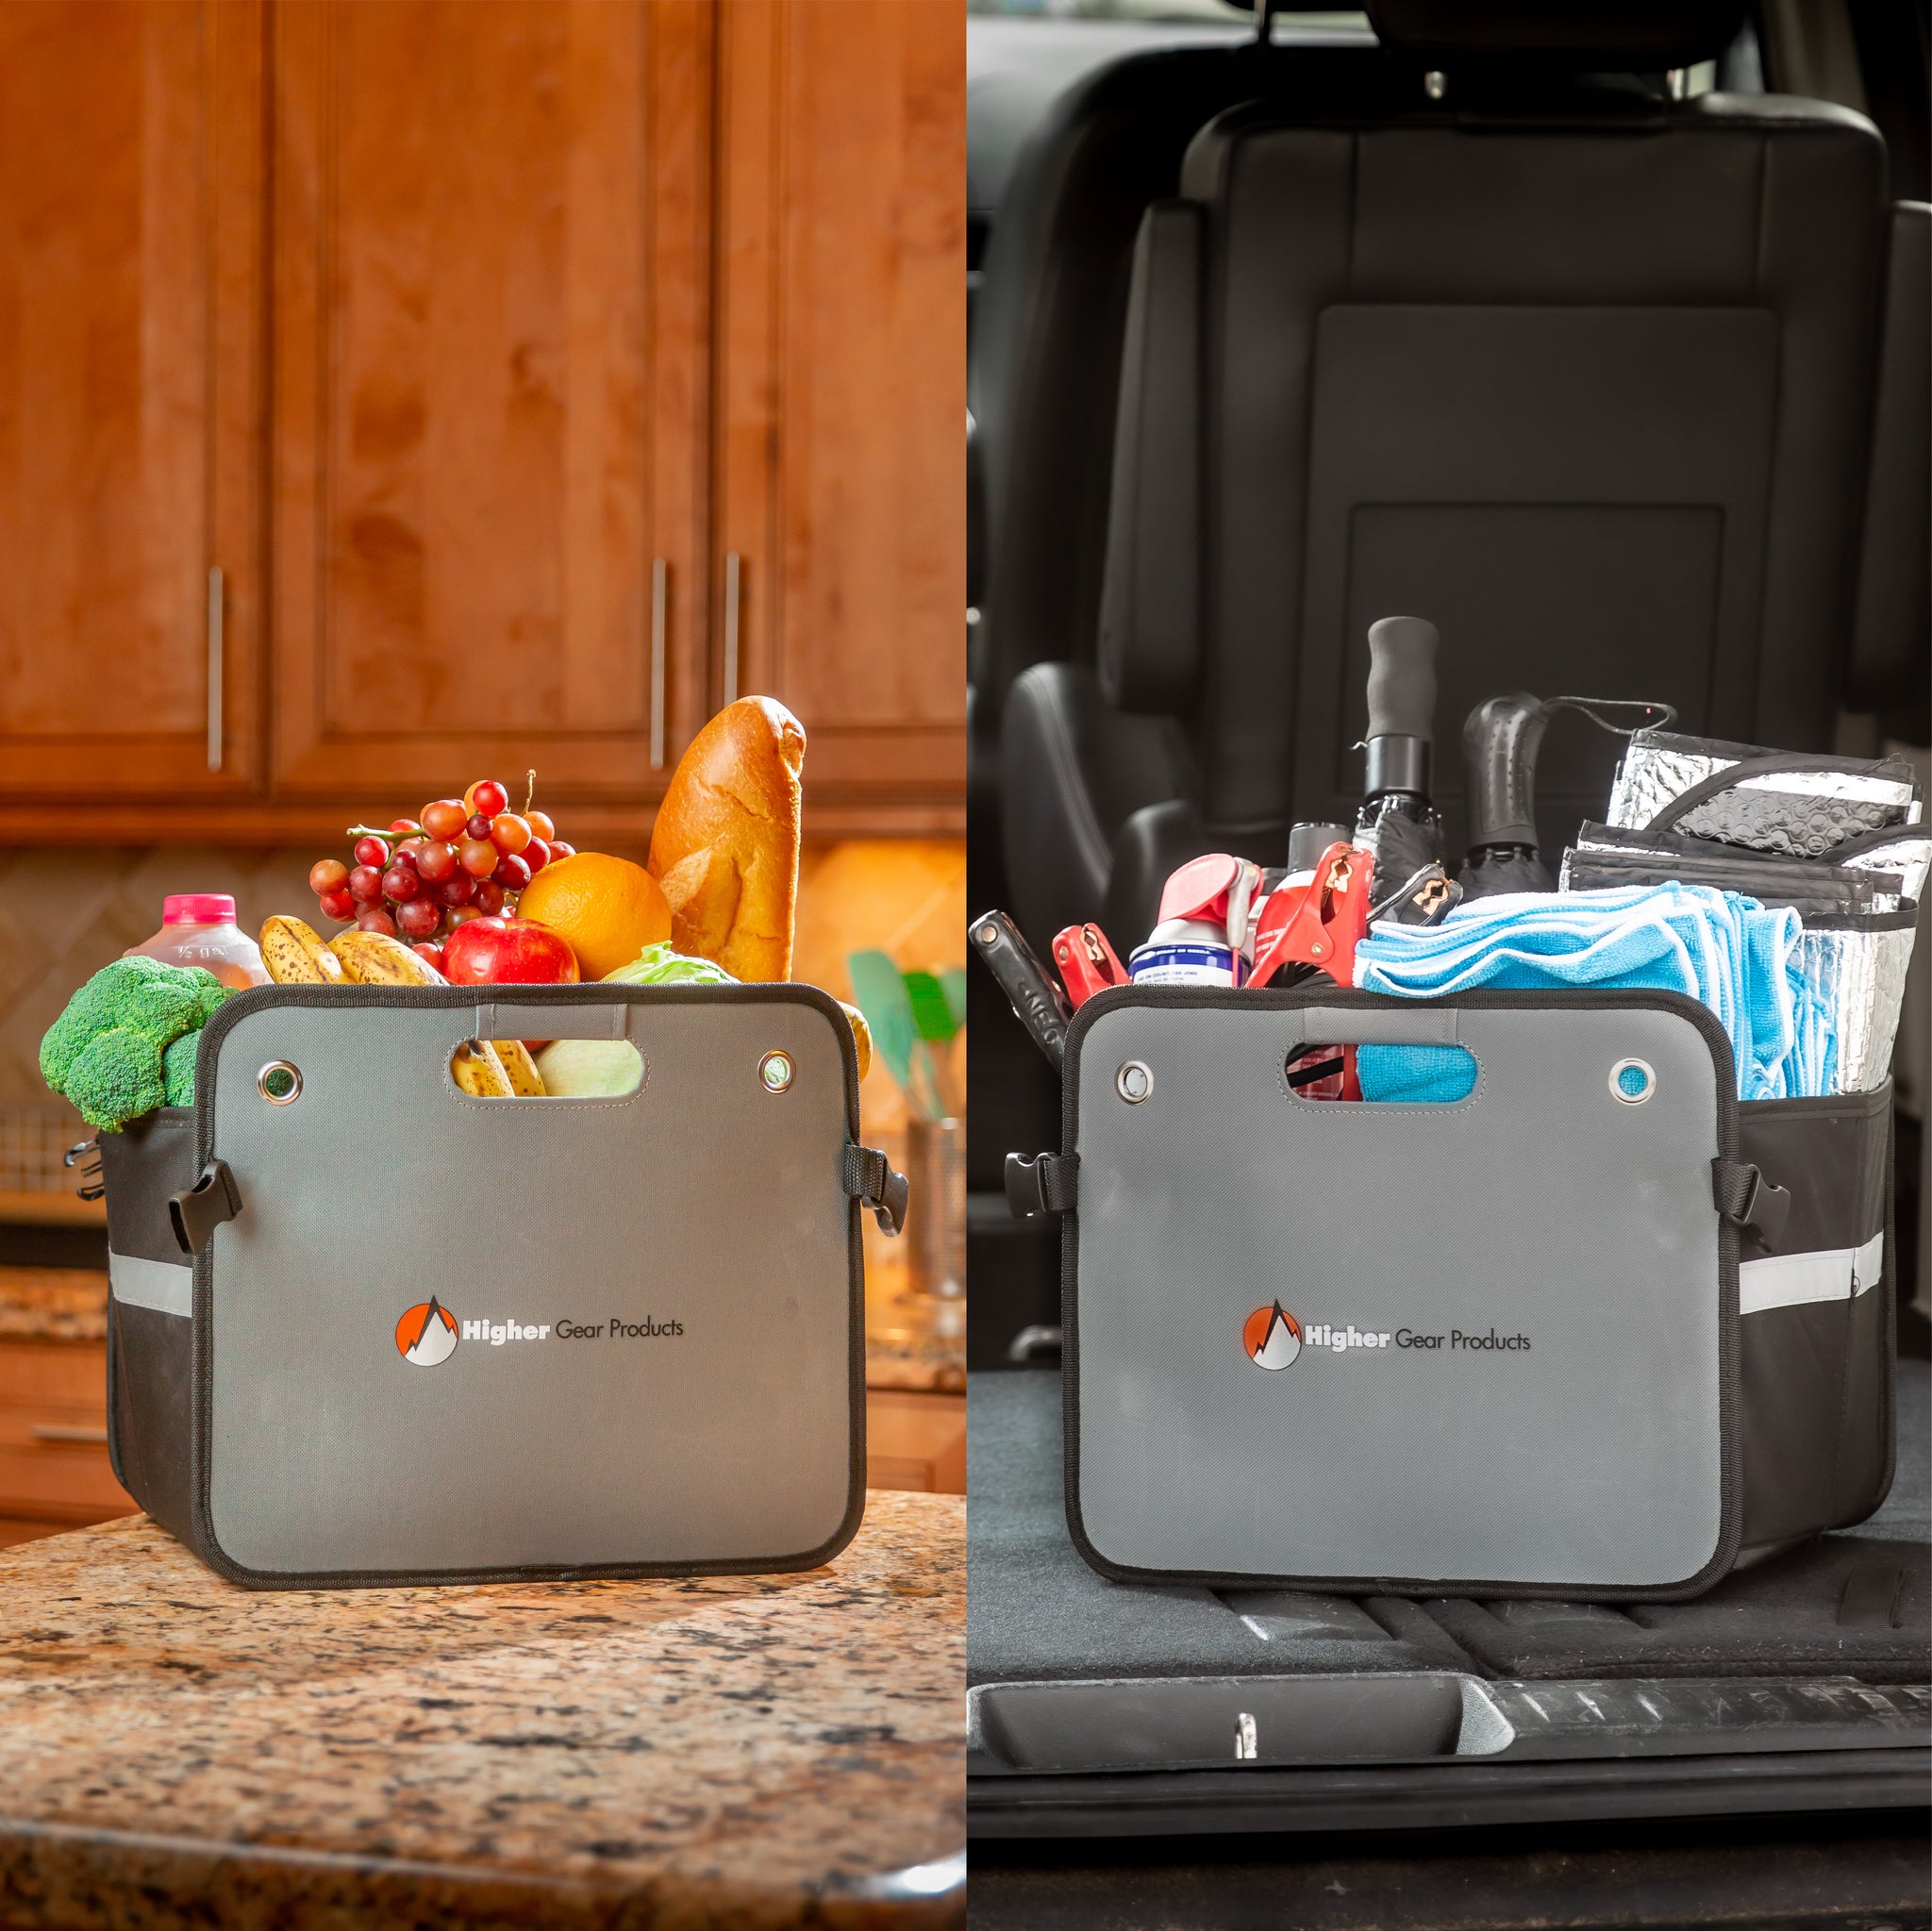 Small Trunk Organizer & Tote - Higher Gear Products